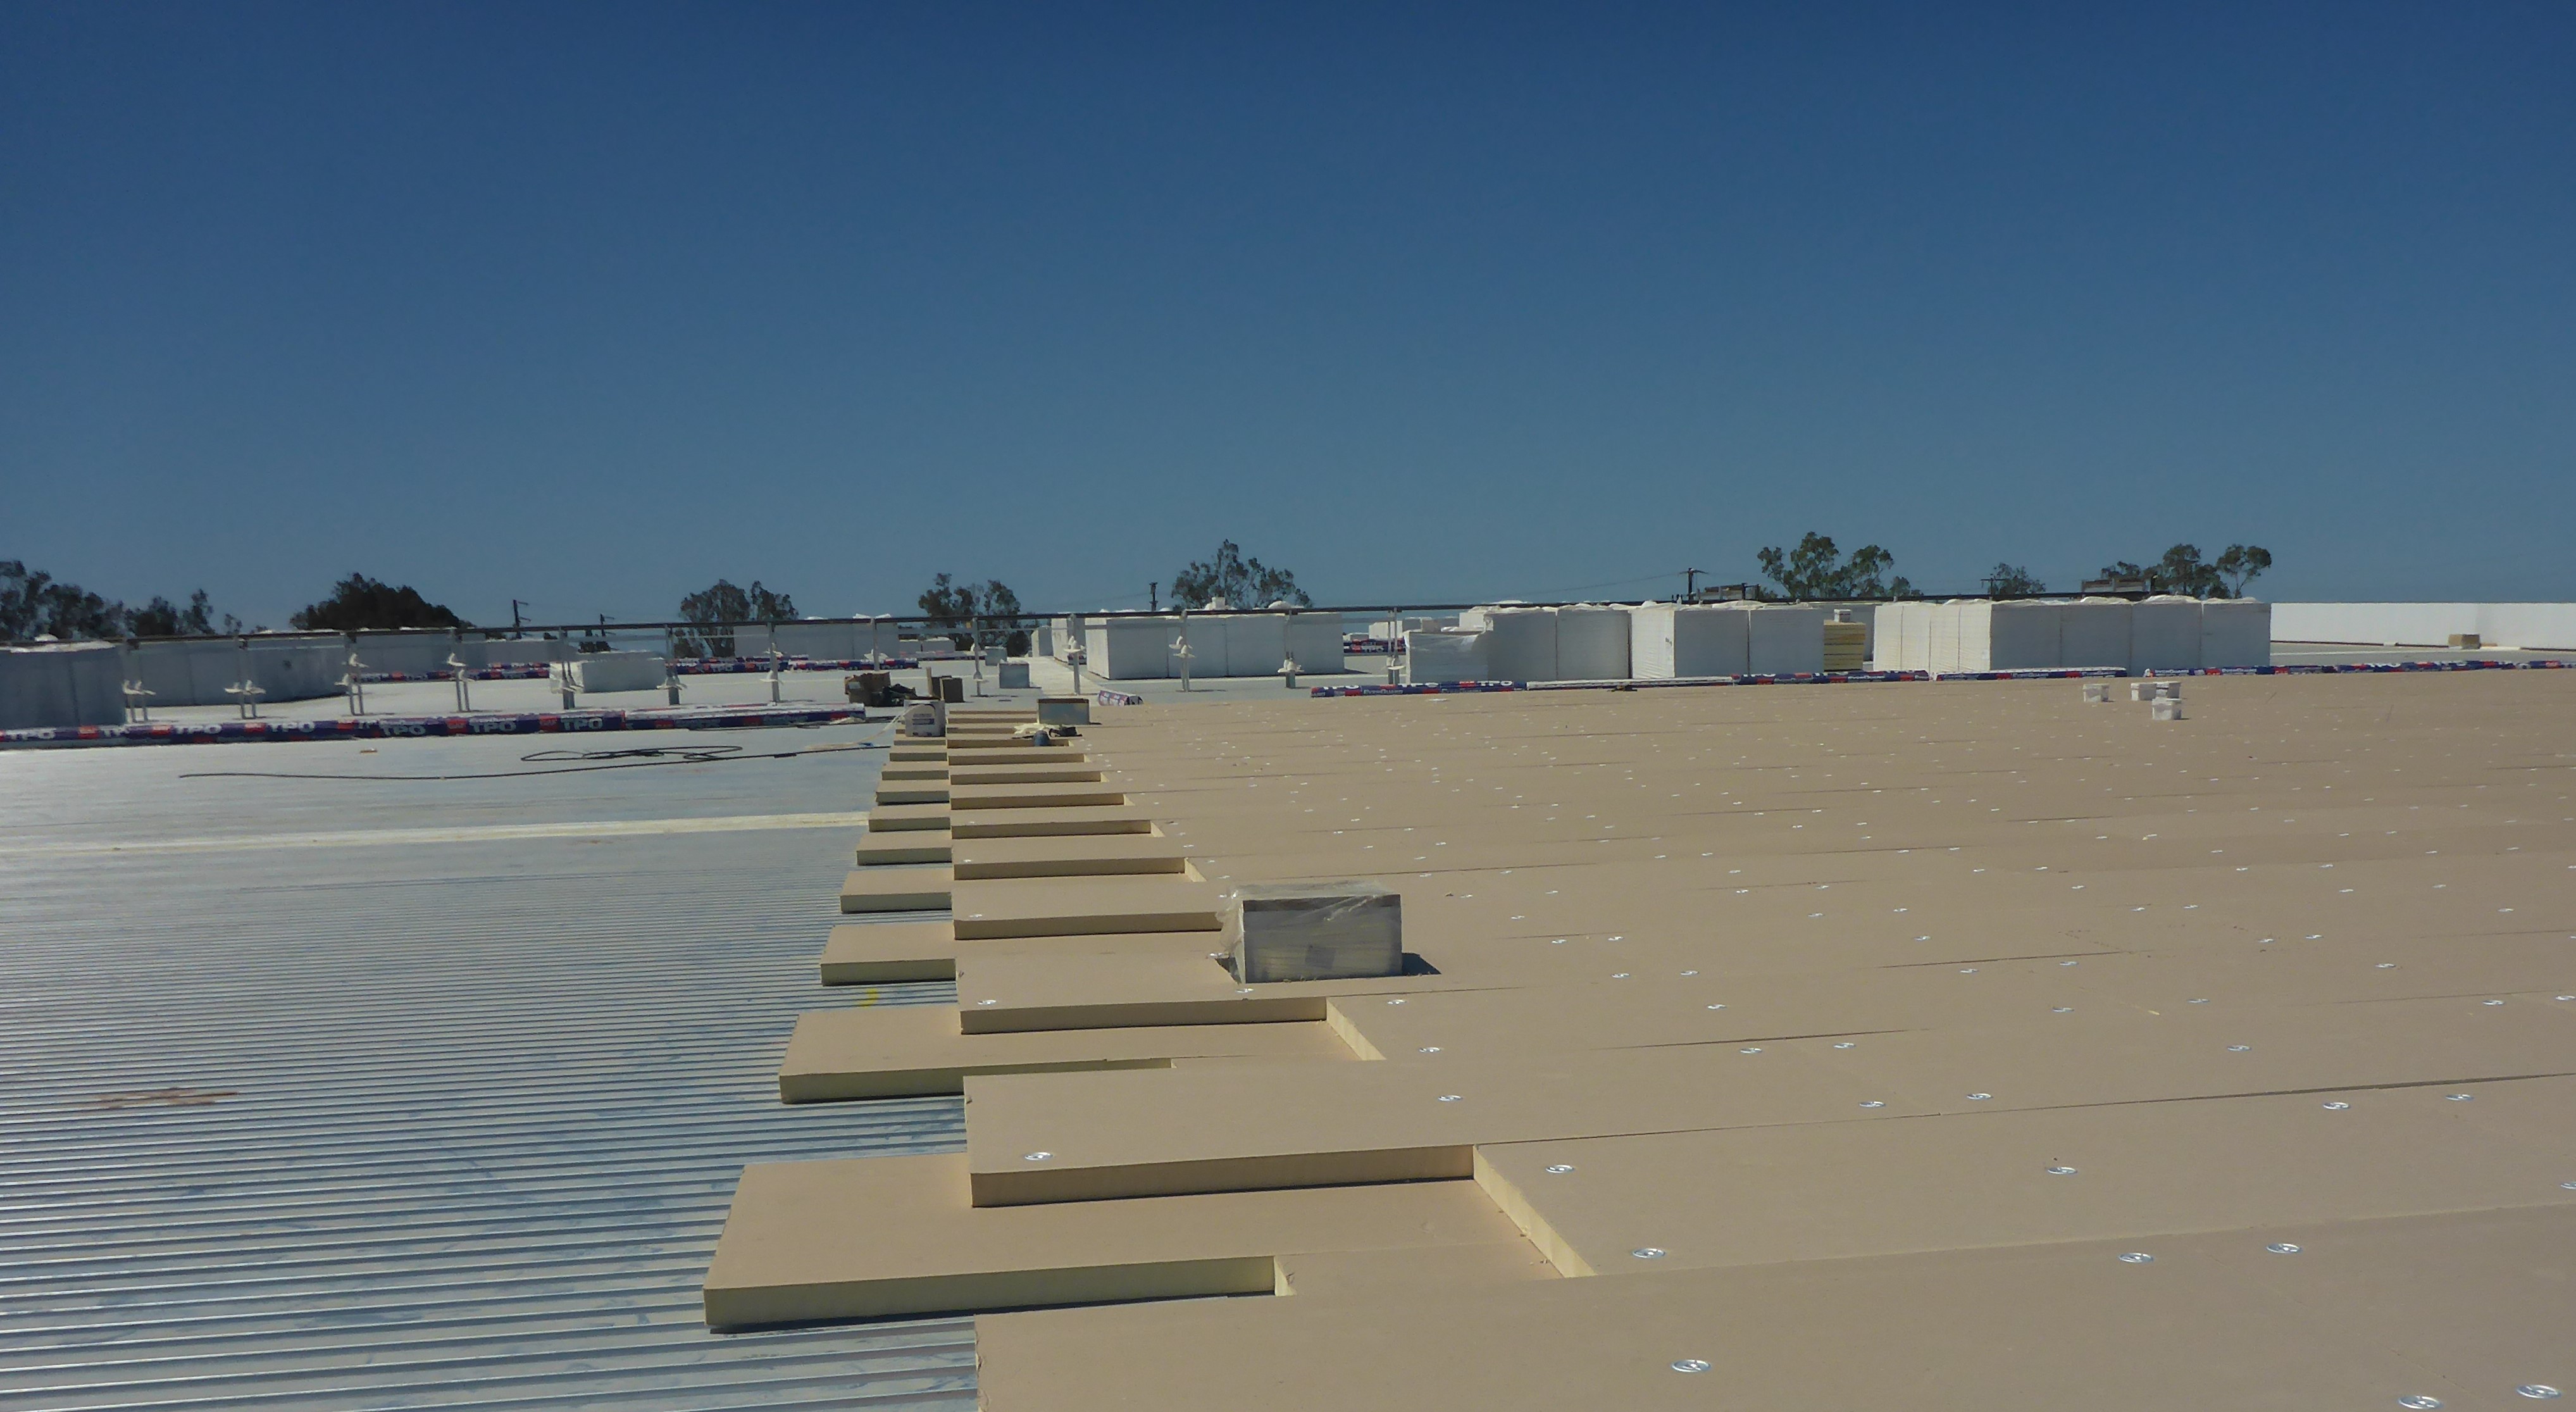 Fasteners - Performance Roof Systems